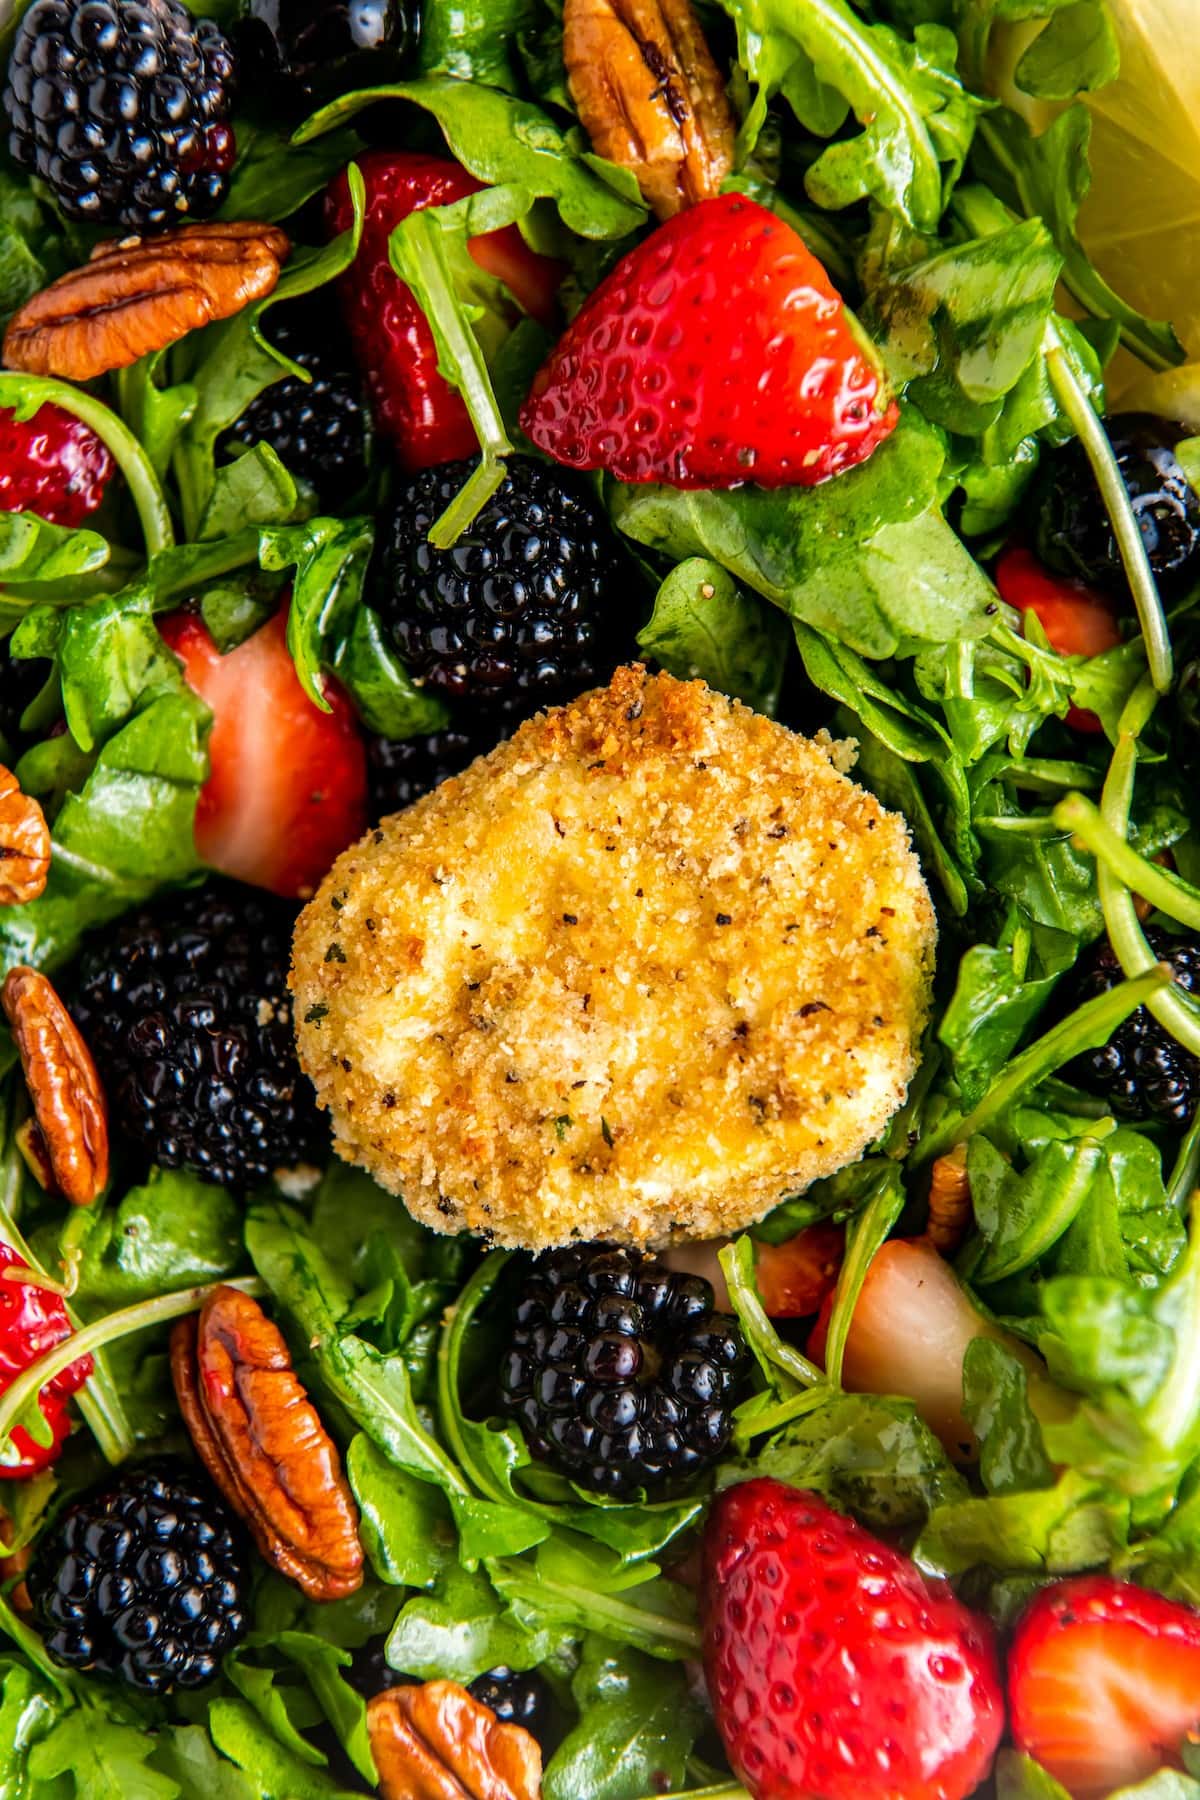 Breaded goat cheese on top of arugula salad with berries.